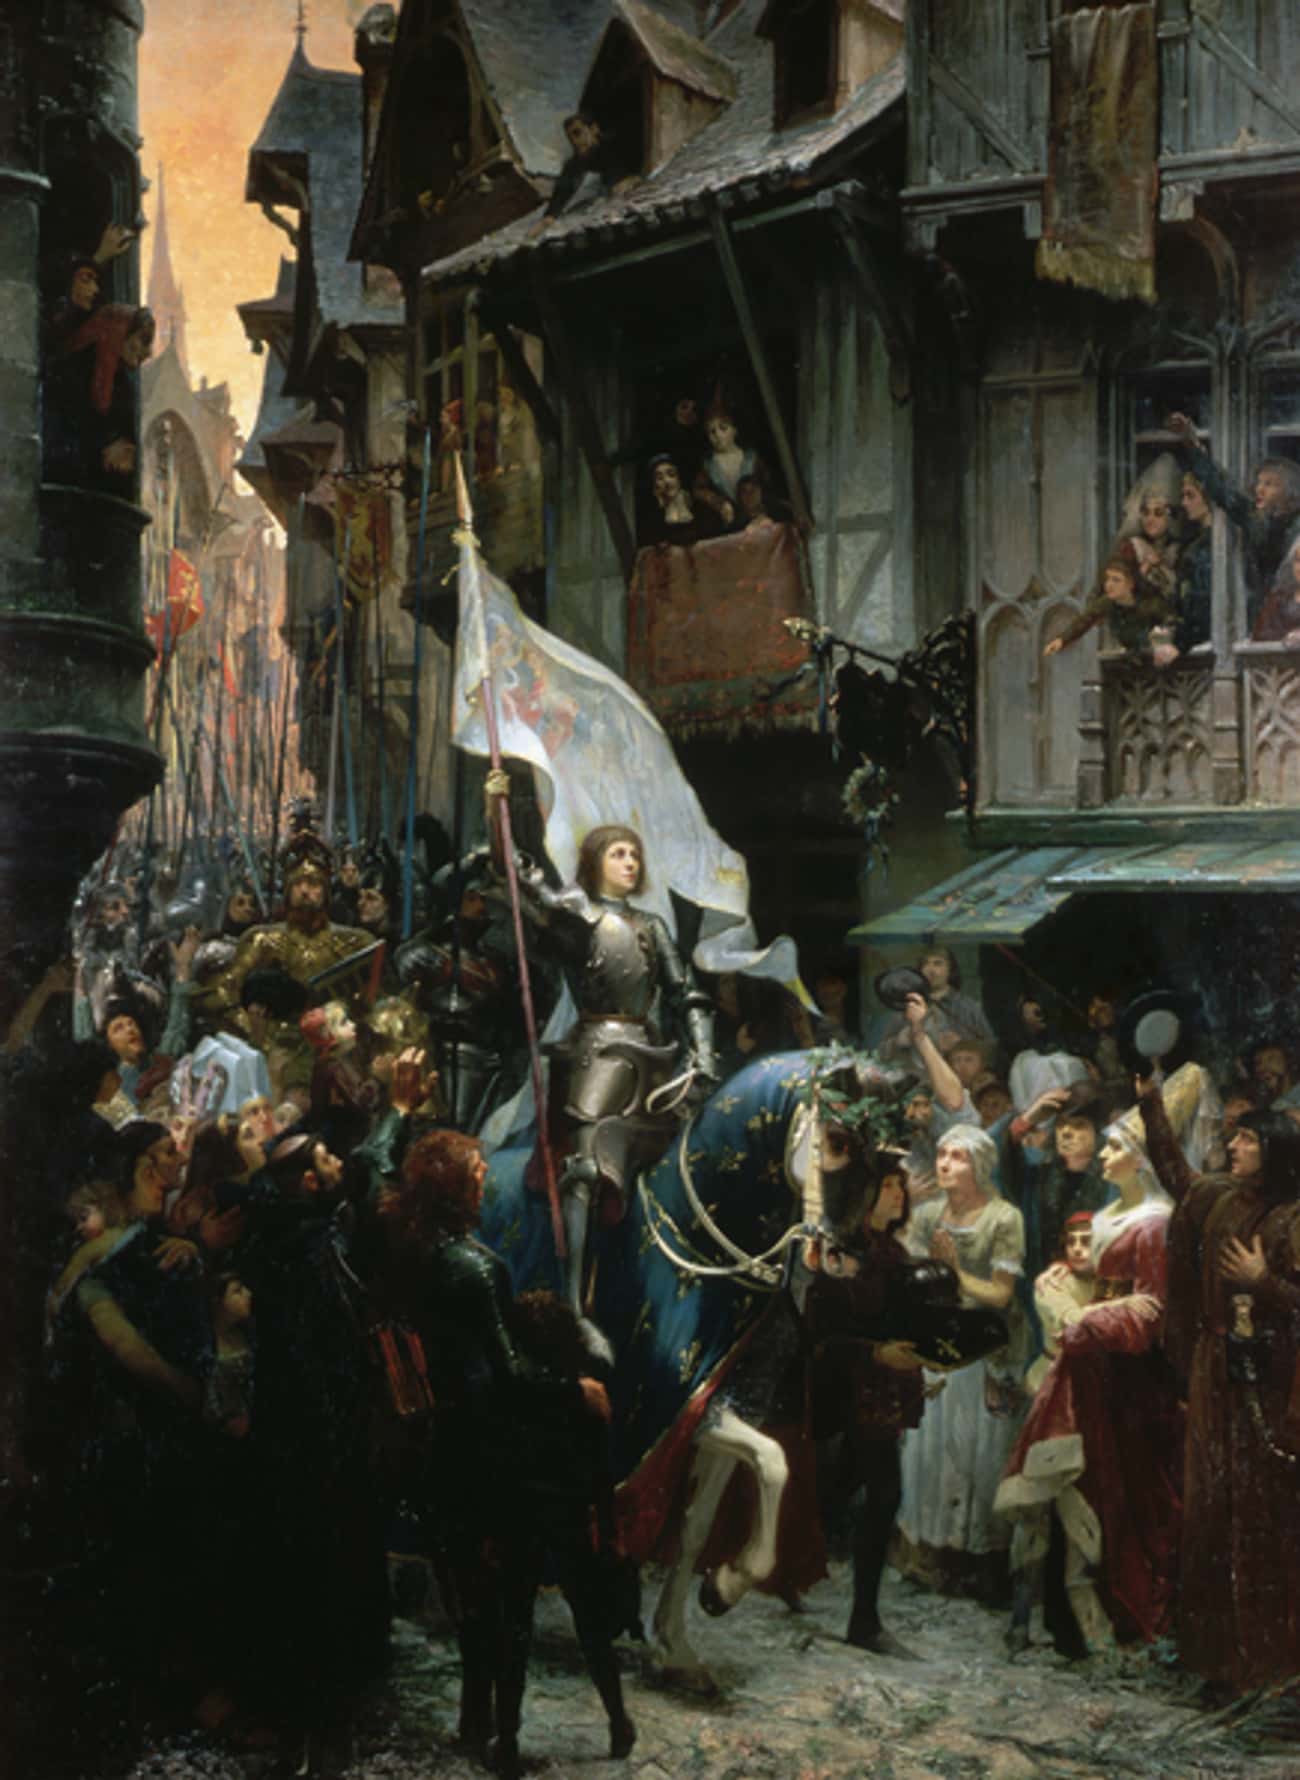 Joan of Arc Was Just A Teenager When She Helped Lead The French Army To Victory